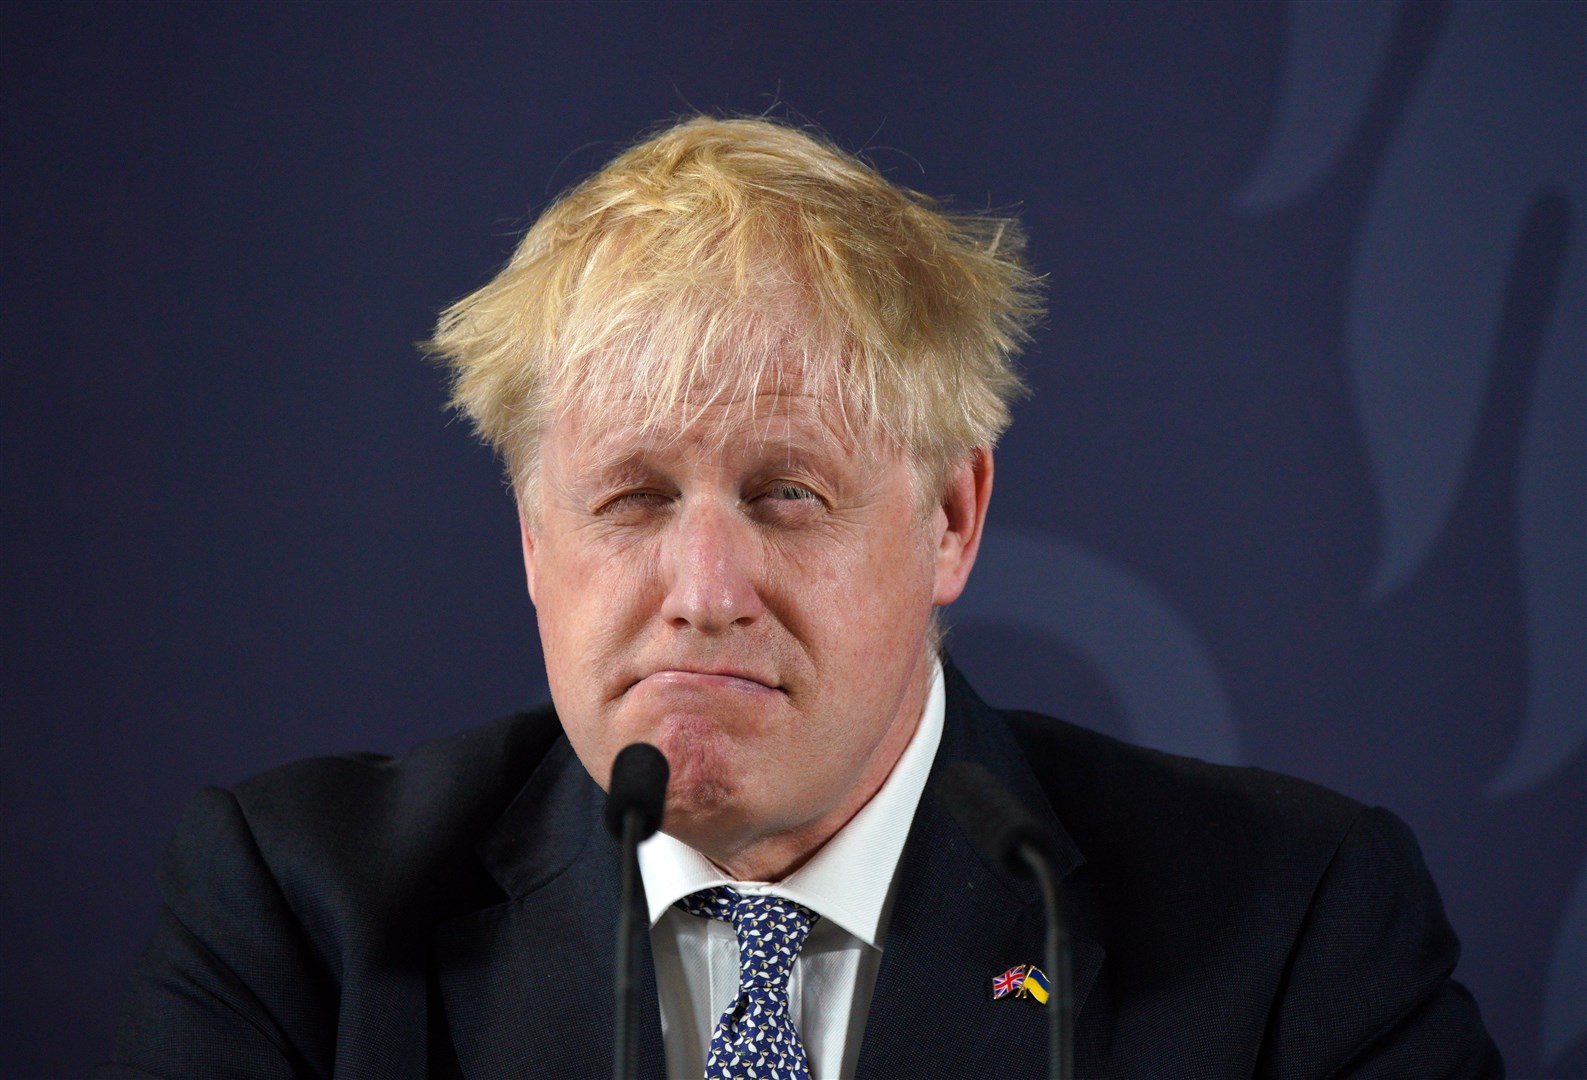 Prime Minister Boris Johnson has said he hopes the proposed legislation would draw a line under the Troubles in NI (Peter Byrne/PA)